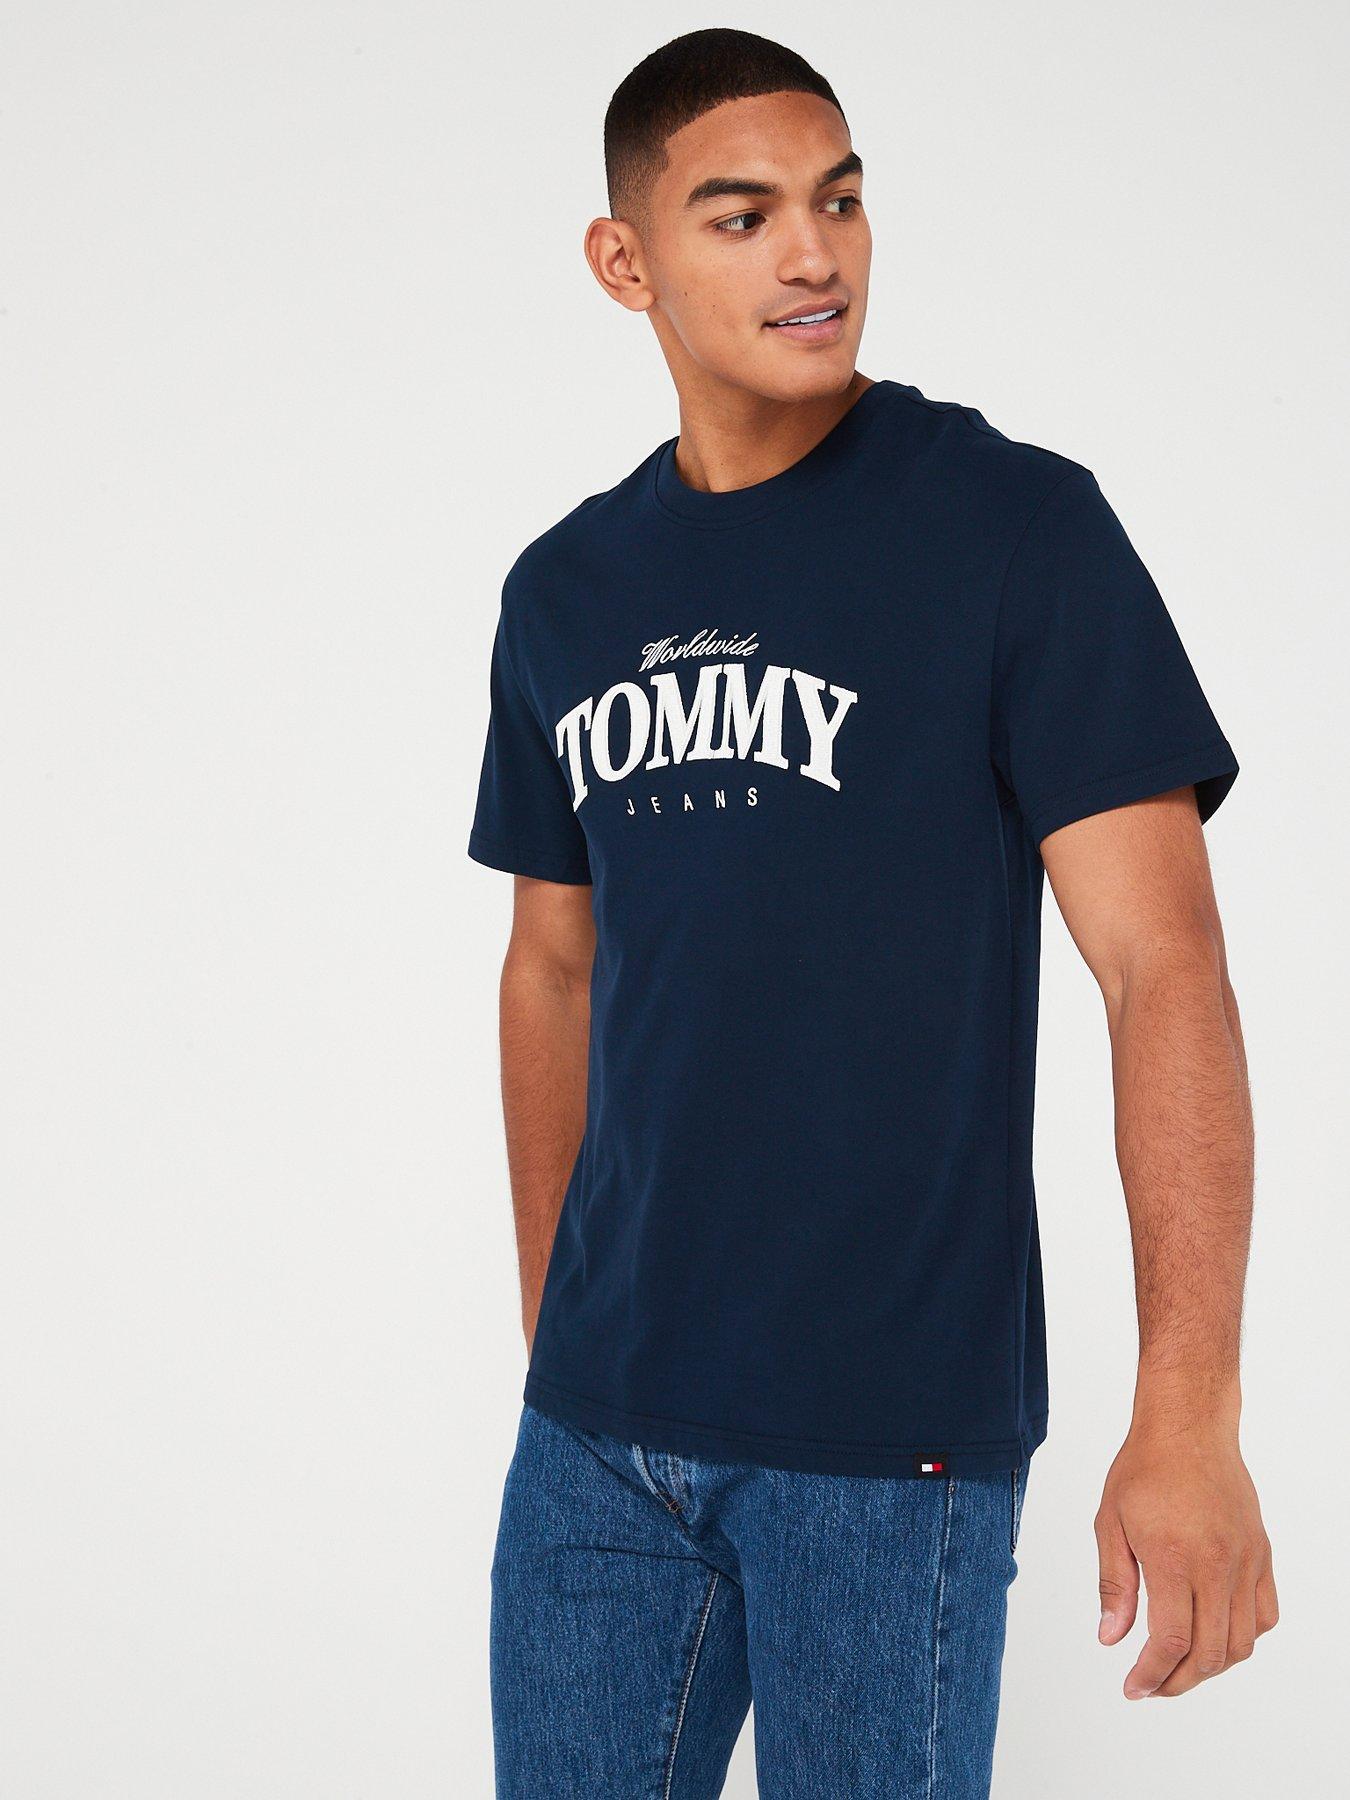 Tommy hilfiger | T-shirts & Very Men | polos | Ireland